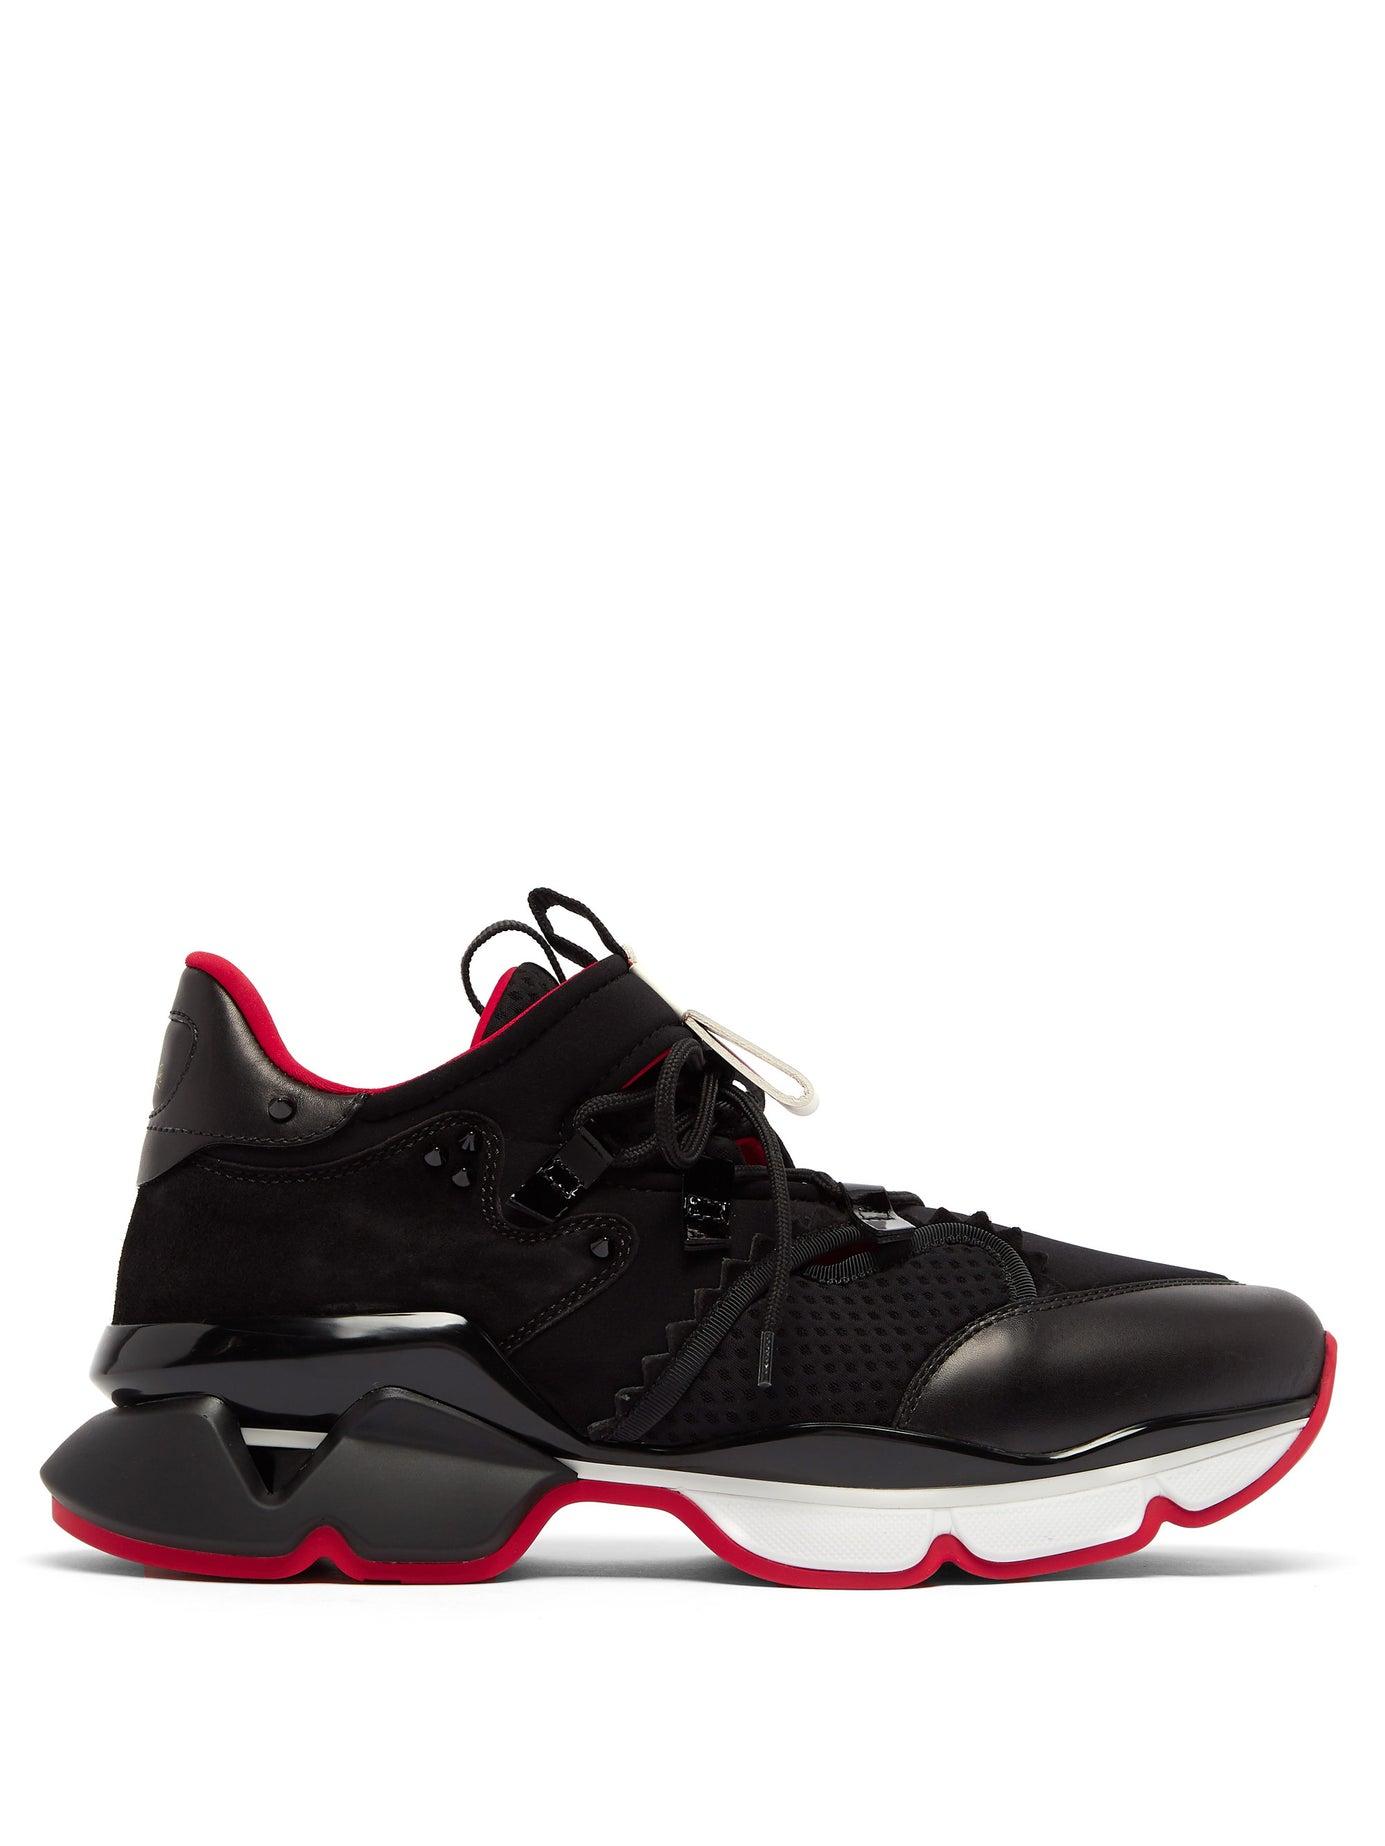 Christian Louboutin Red Runner Suede & Leather Sneaker in Black 